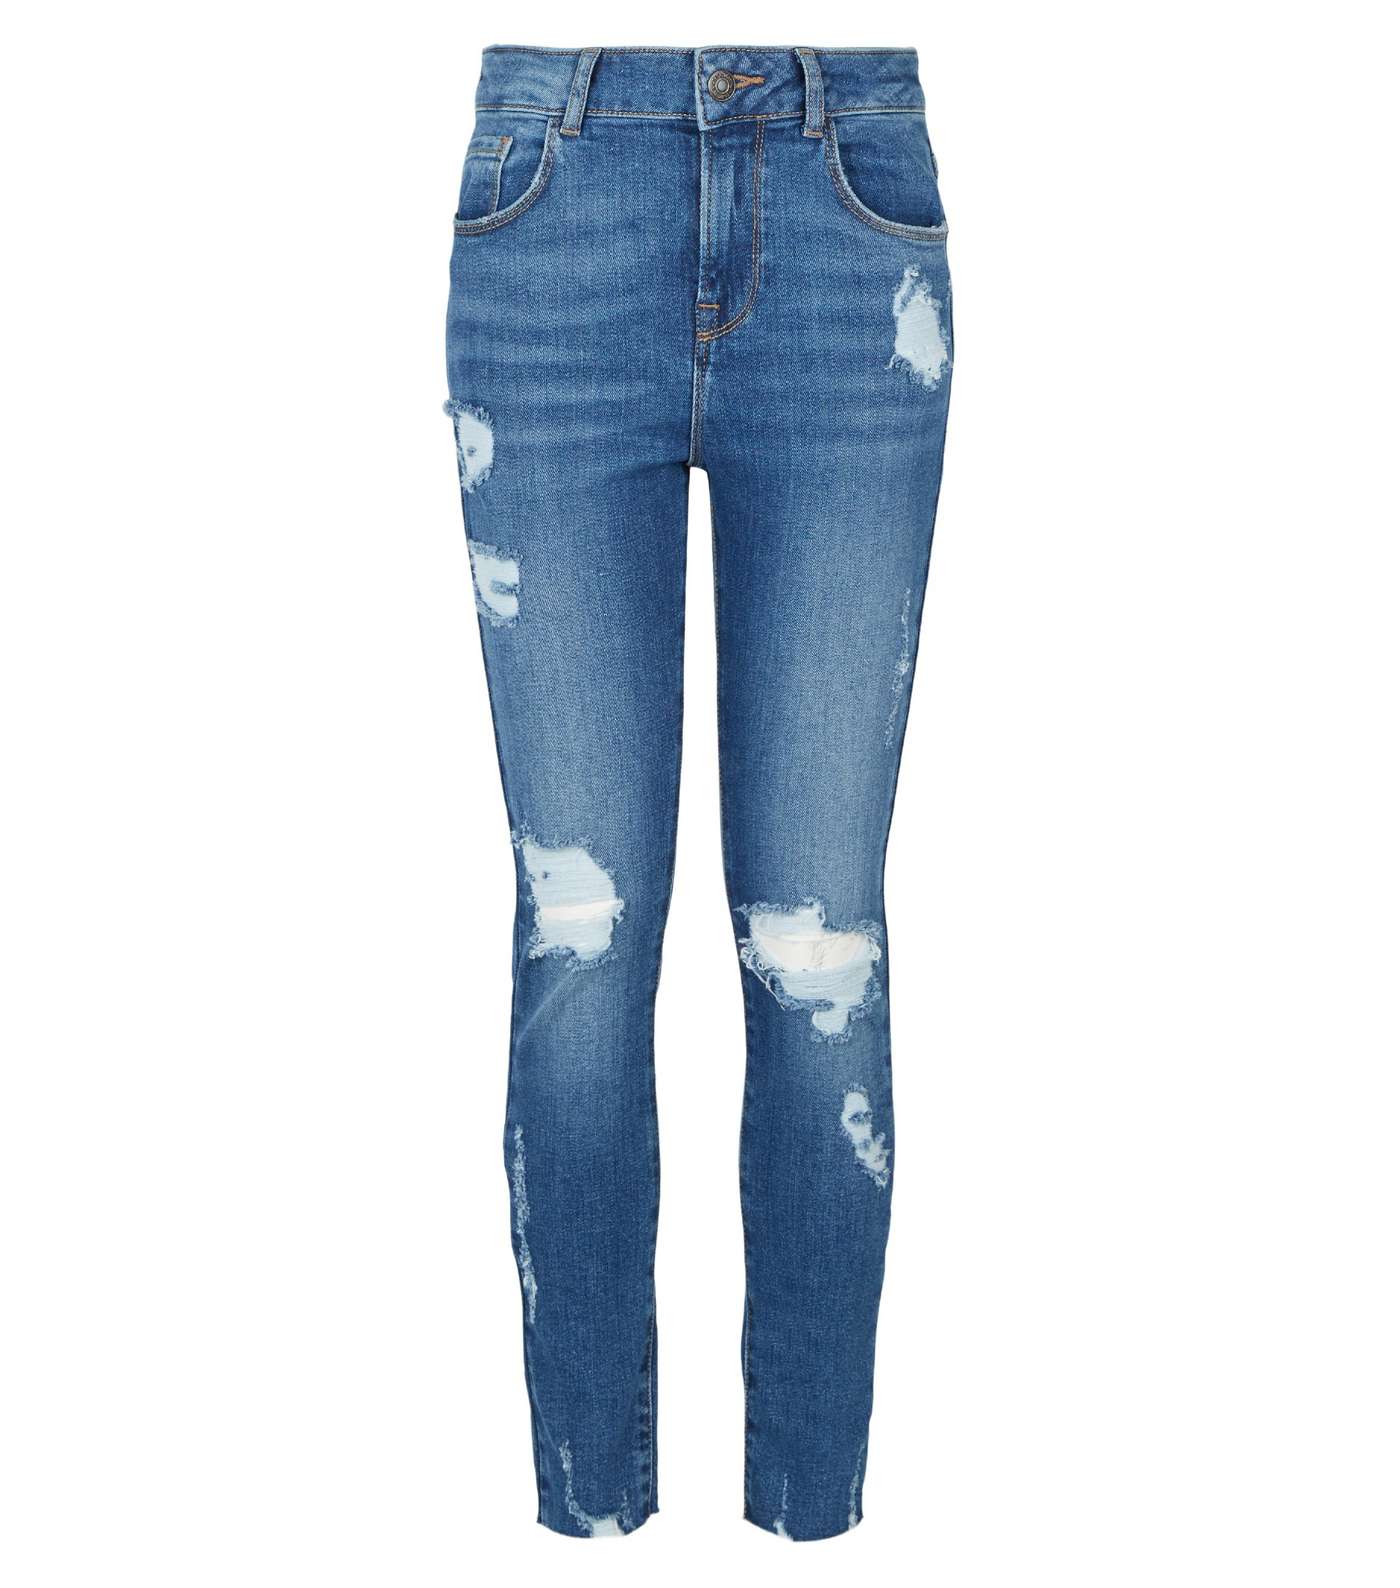 Girls Blue Ripped Mid Wash Skinny Jeans Image 4